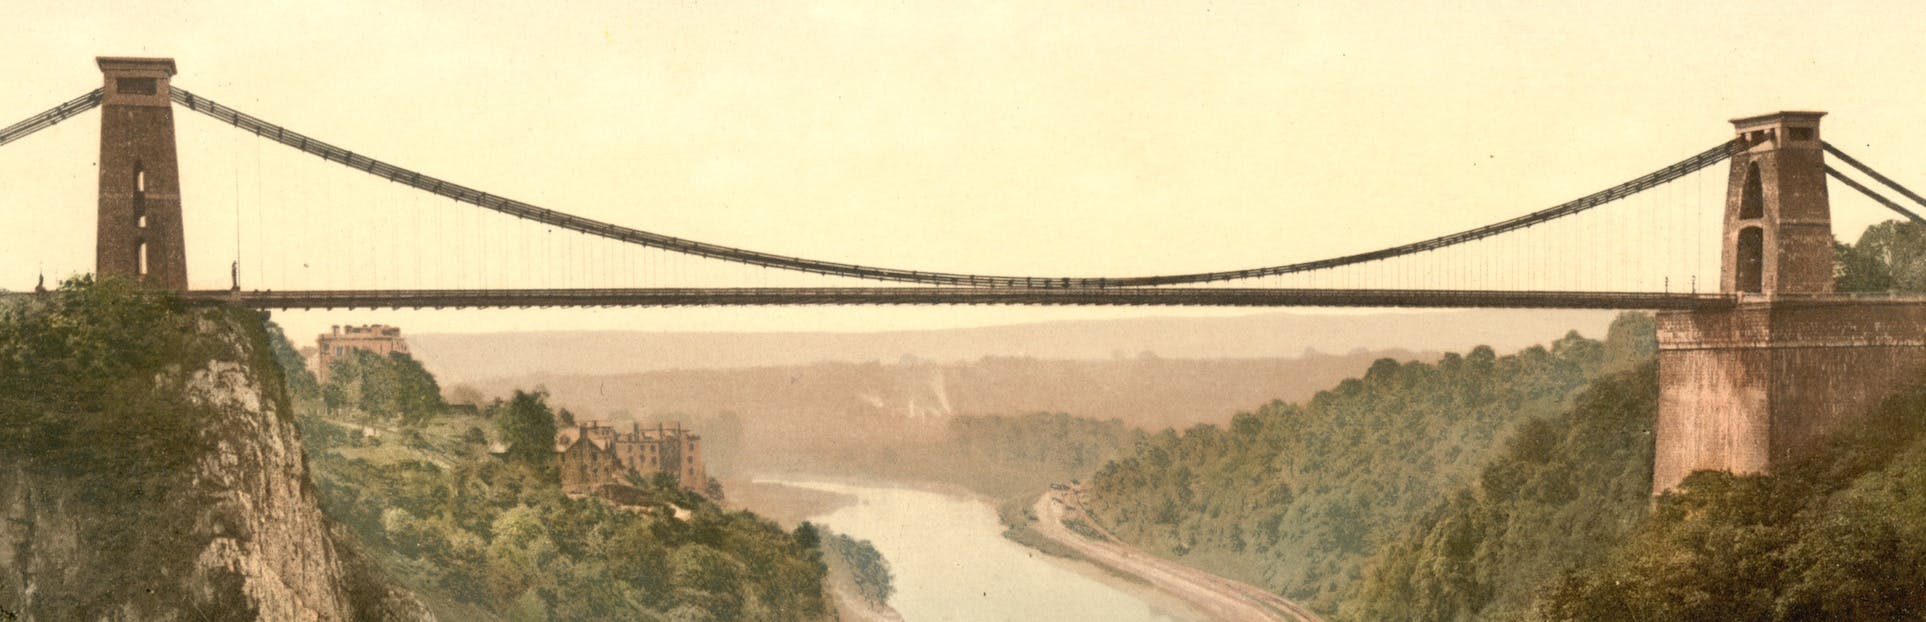 Discover Brunel's boat and bridge on a self-guided audio tour in Bristol